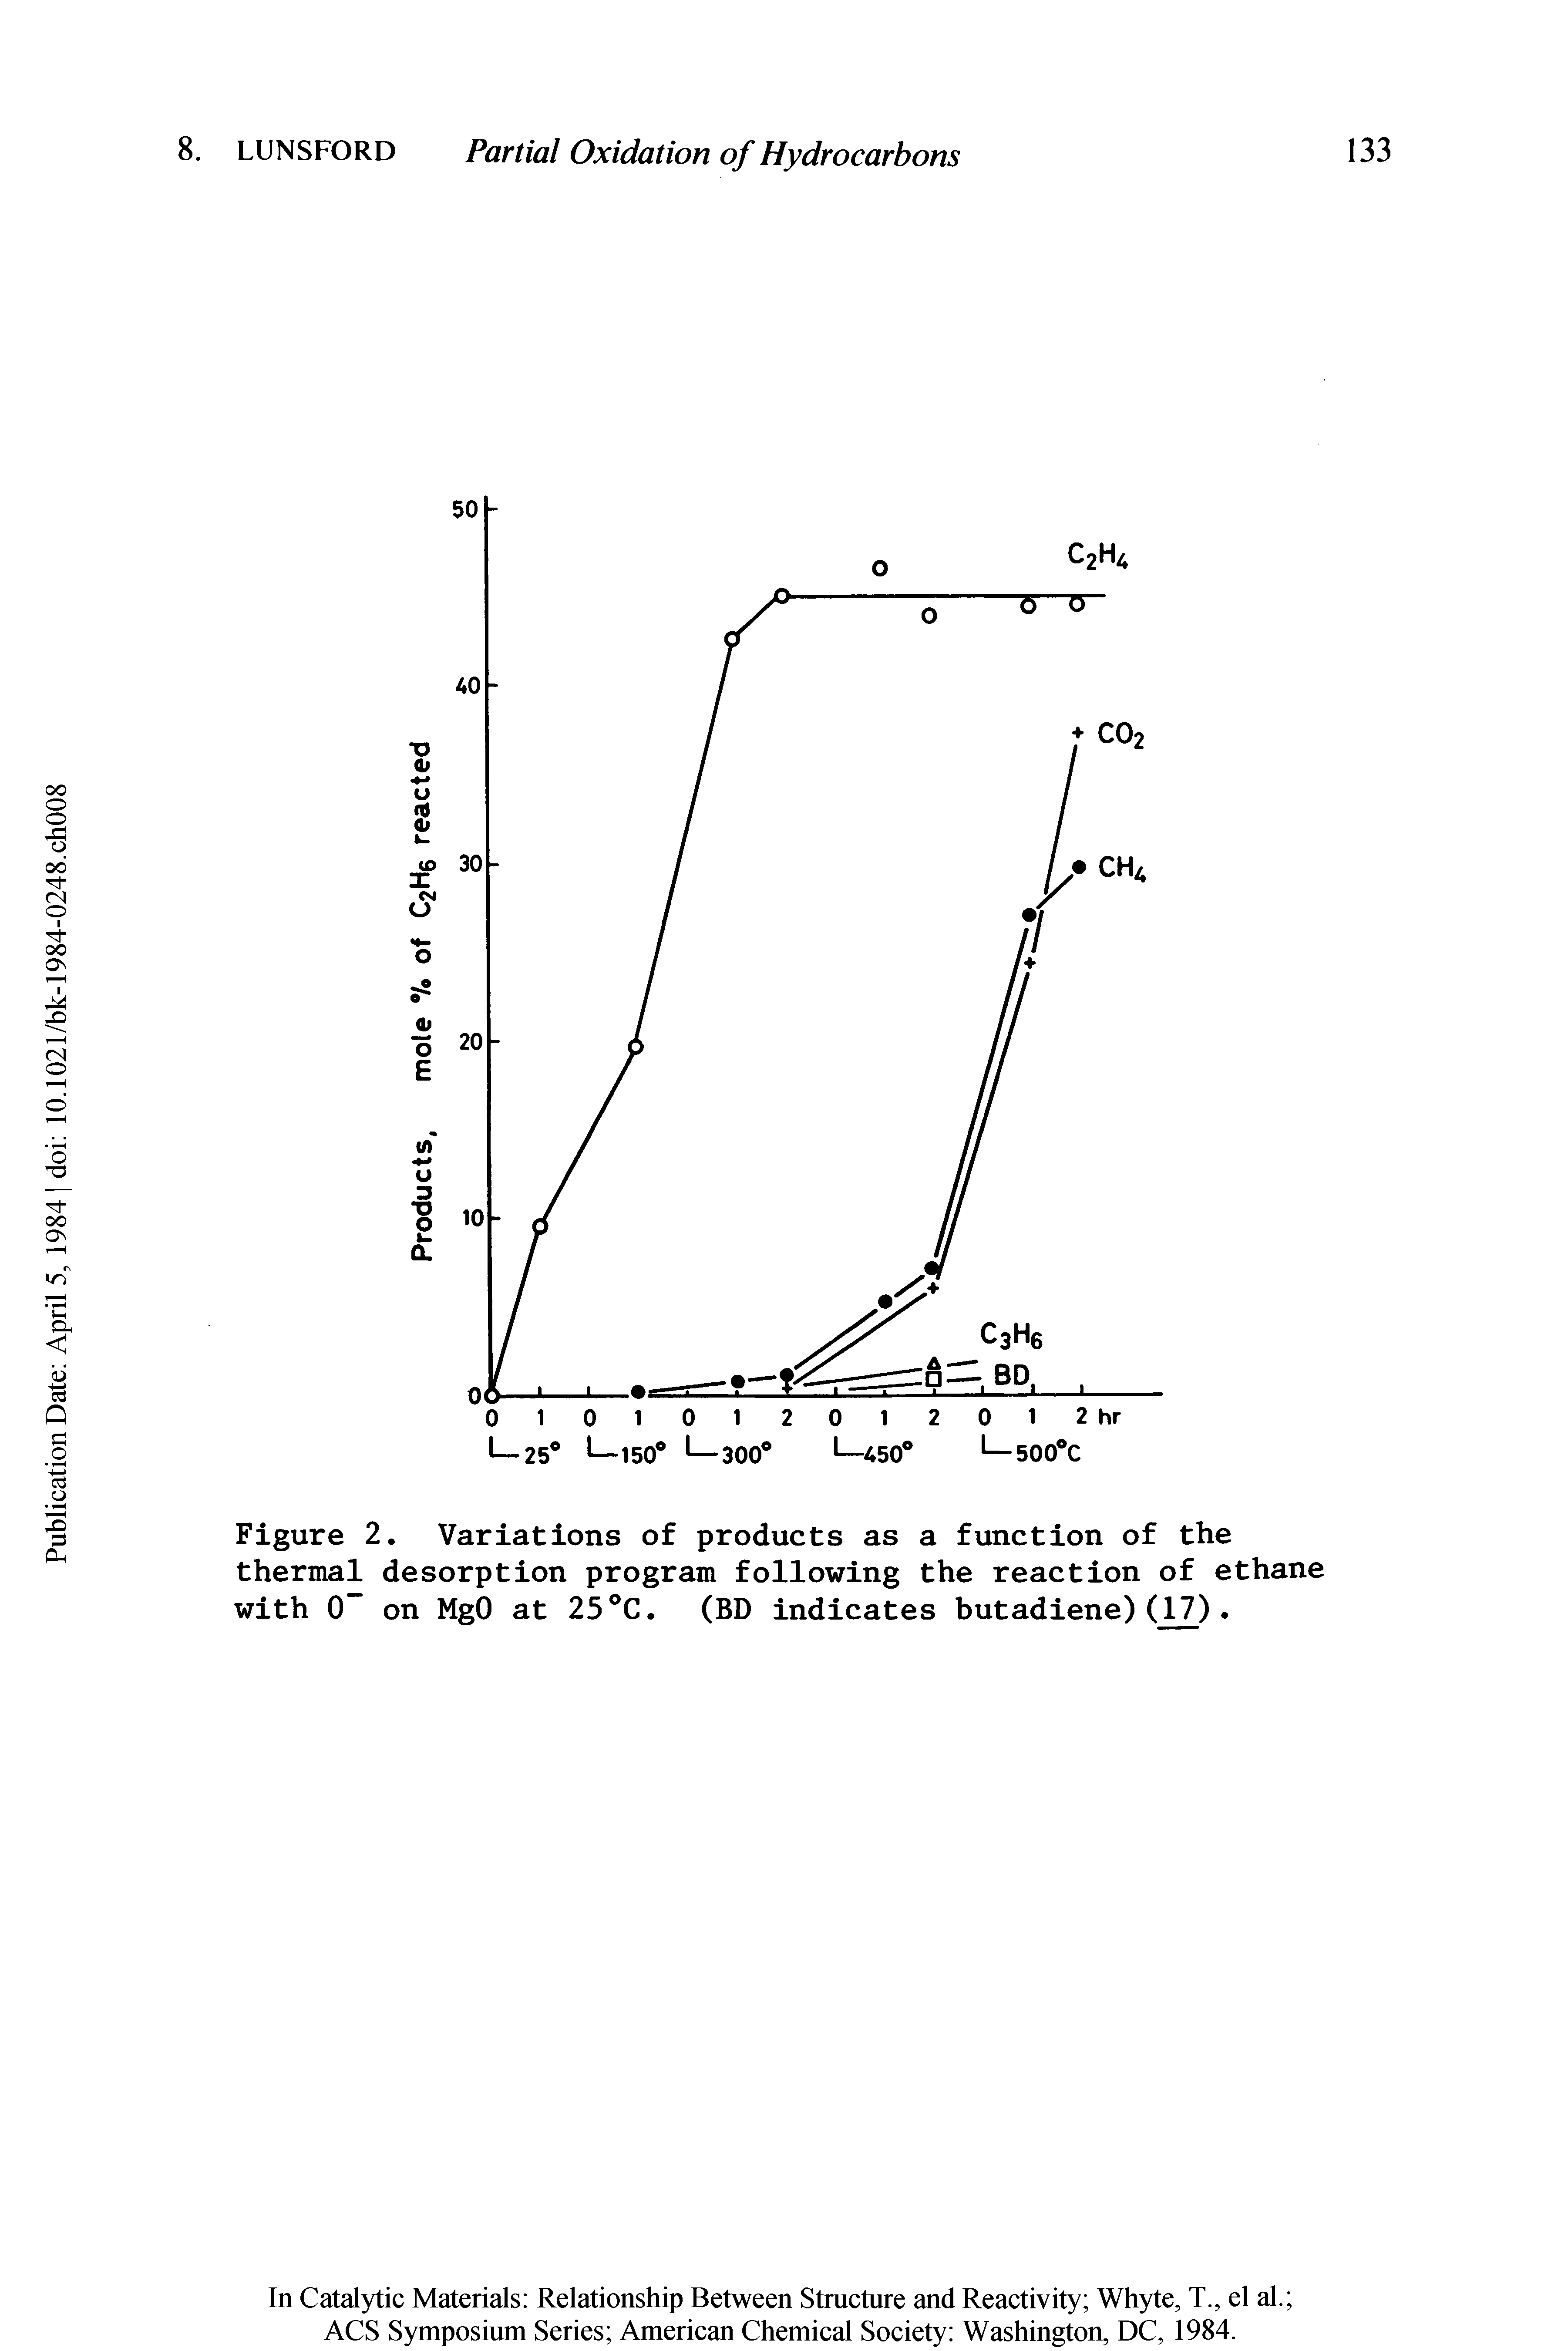 Figure 2. Variations of products as a function of the thermal desorption program following the reaction of ethane with 0 on MgO at 25°C. (BD indicates butadiene)(17).